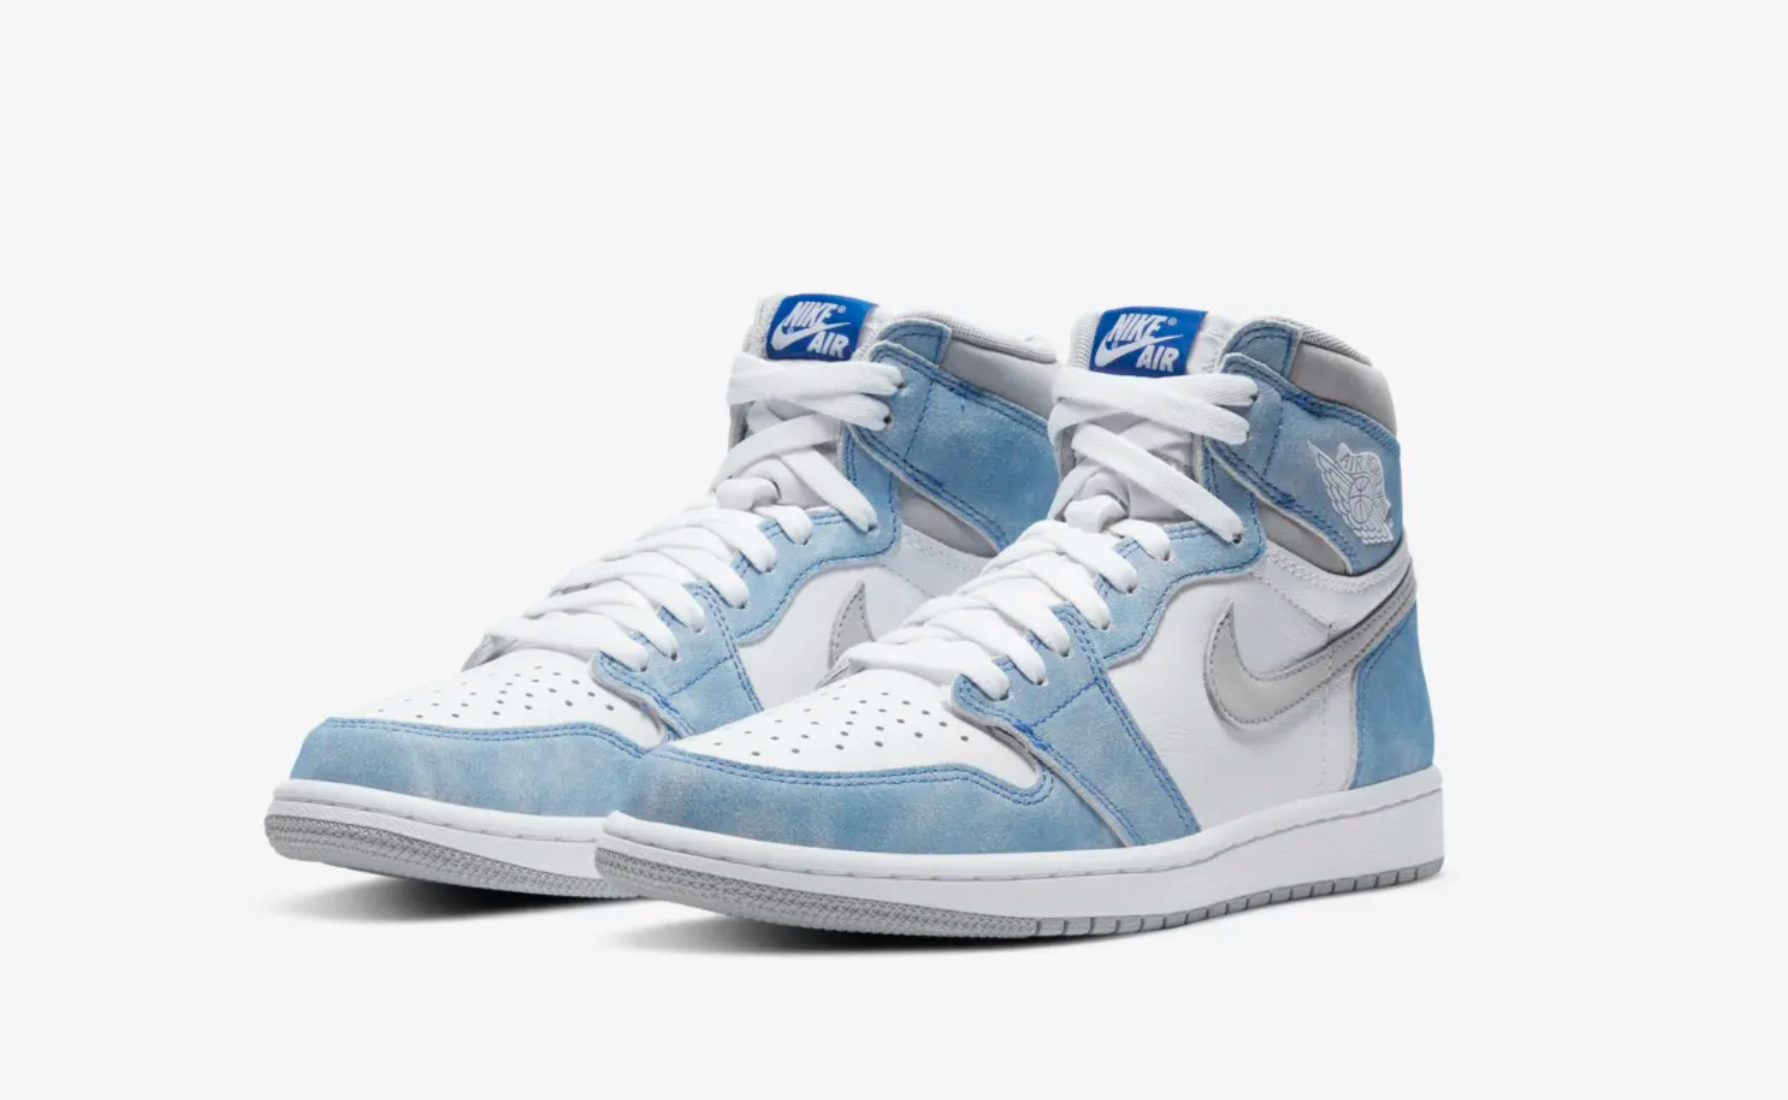 Twitter Reacts To Air Jordan 1 "Hyper Royal" Release On SNKRS